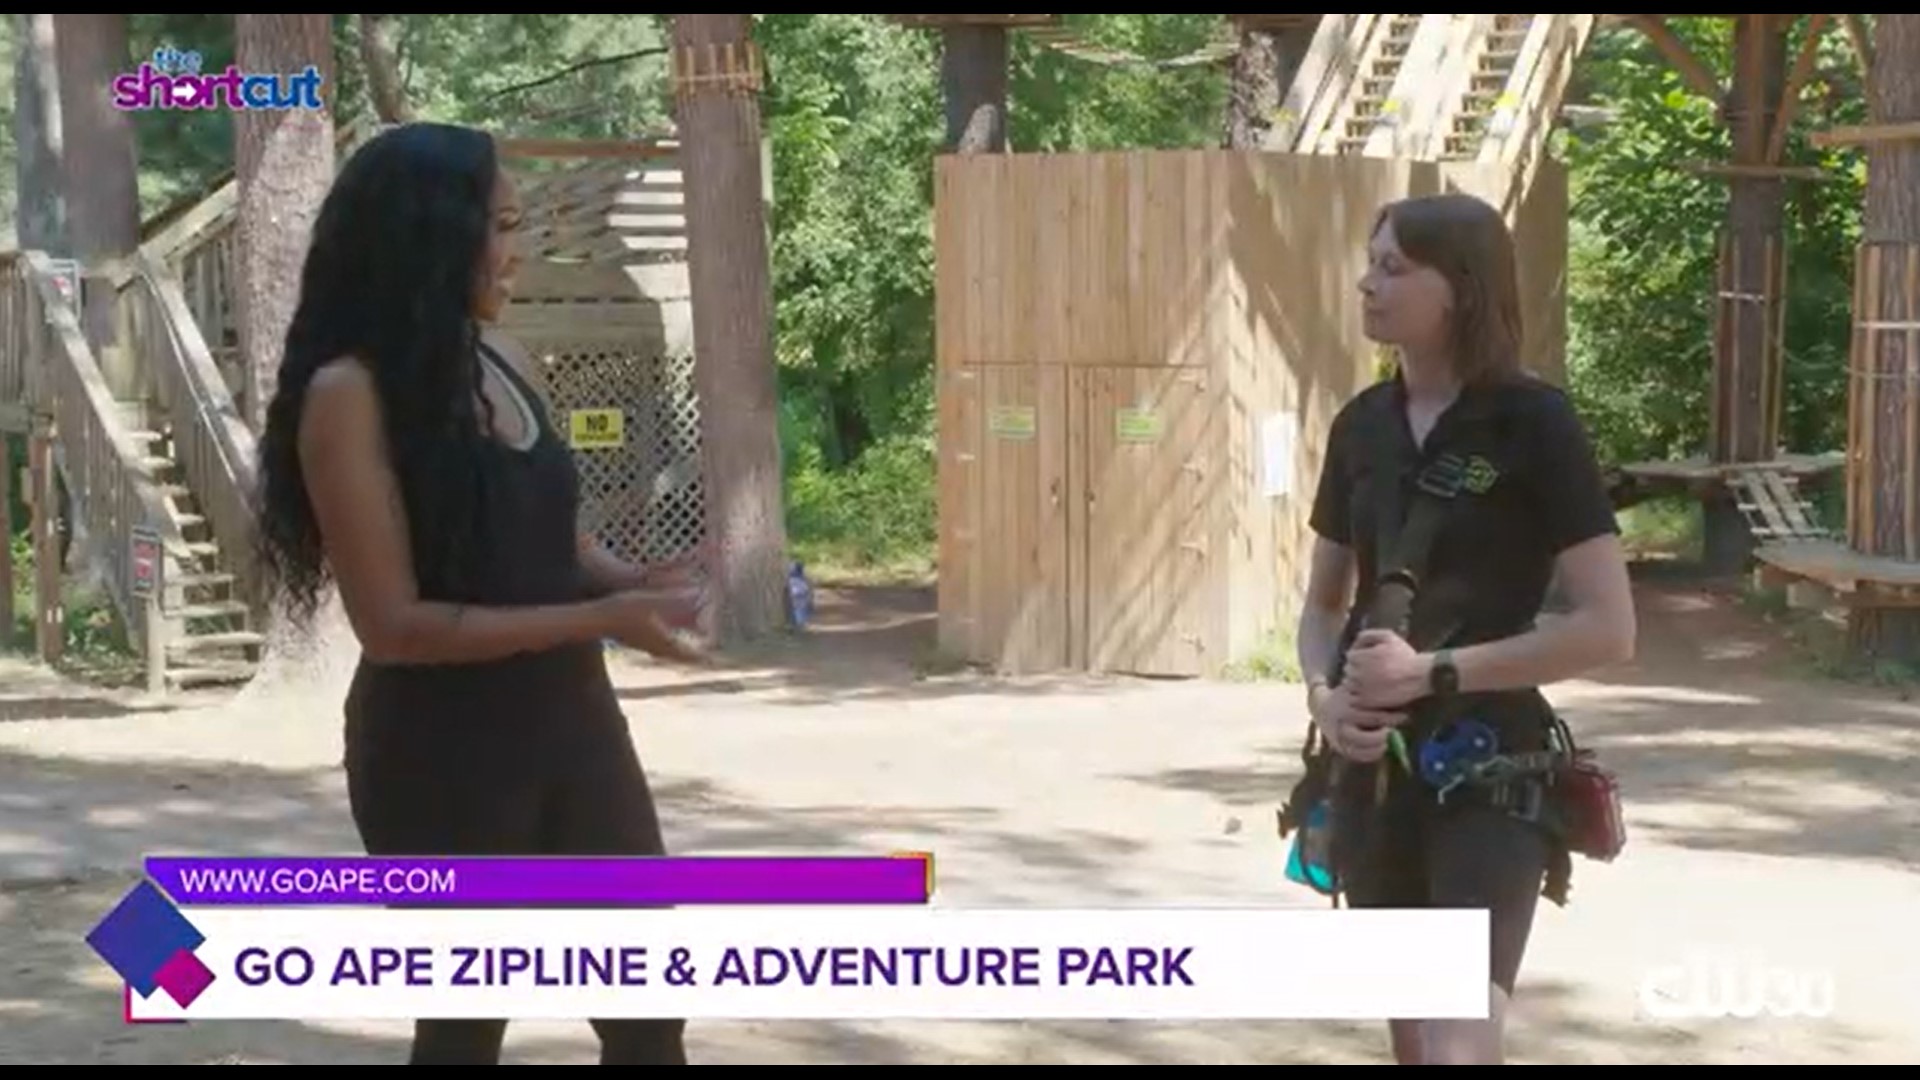 Whether you love or hate heights, join Sydney Neely and Lauren Hansel as we take a walk on the wild side at Shelby Farms Park's Go Ape Zipline & Adventure Park!